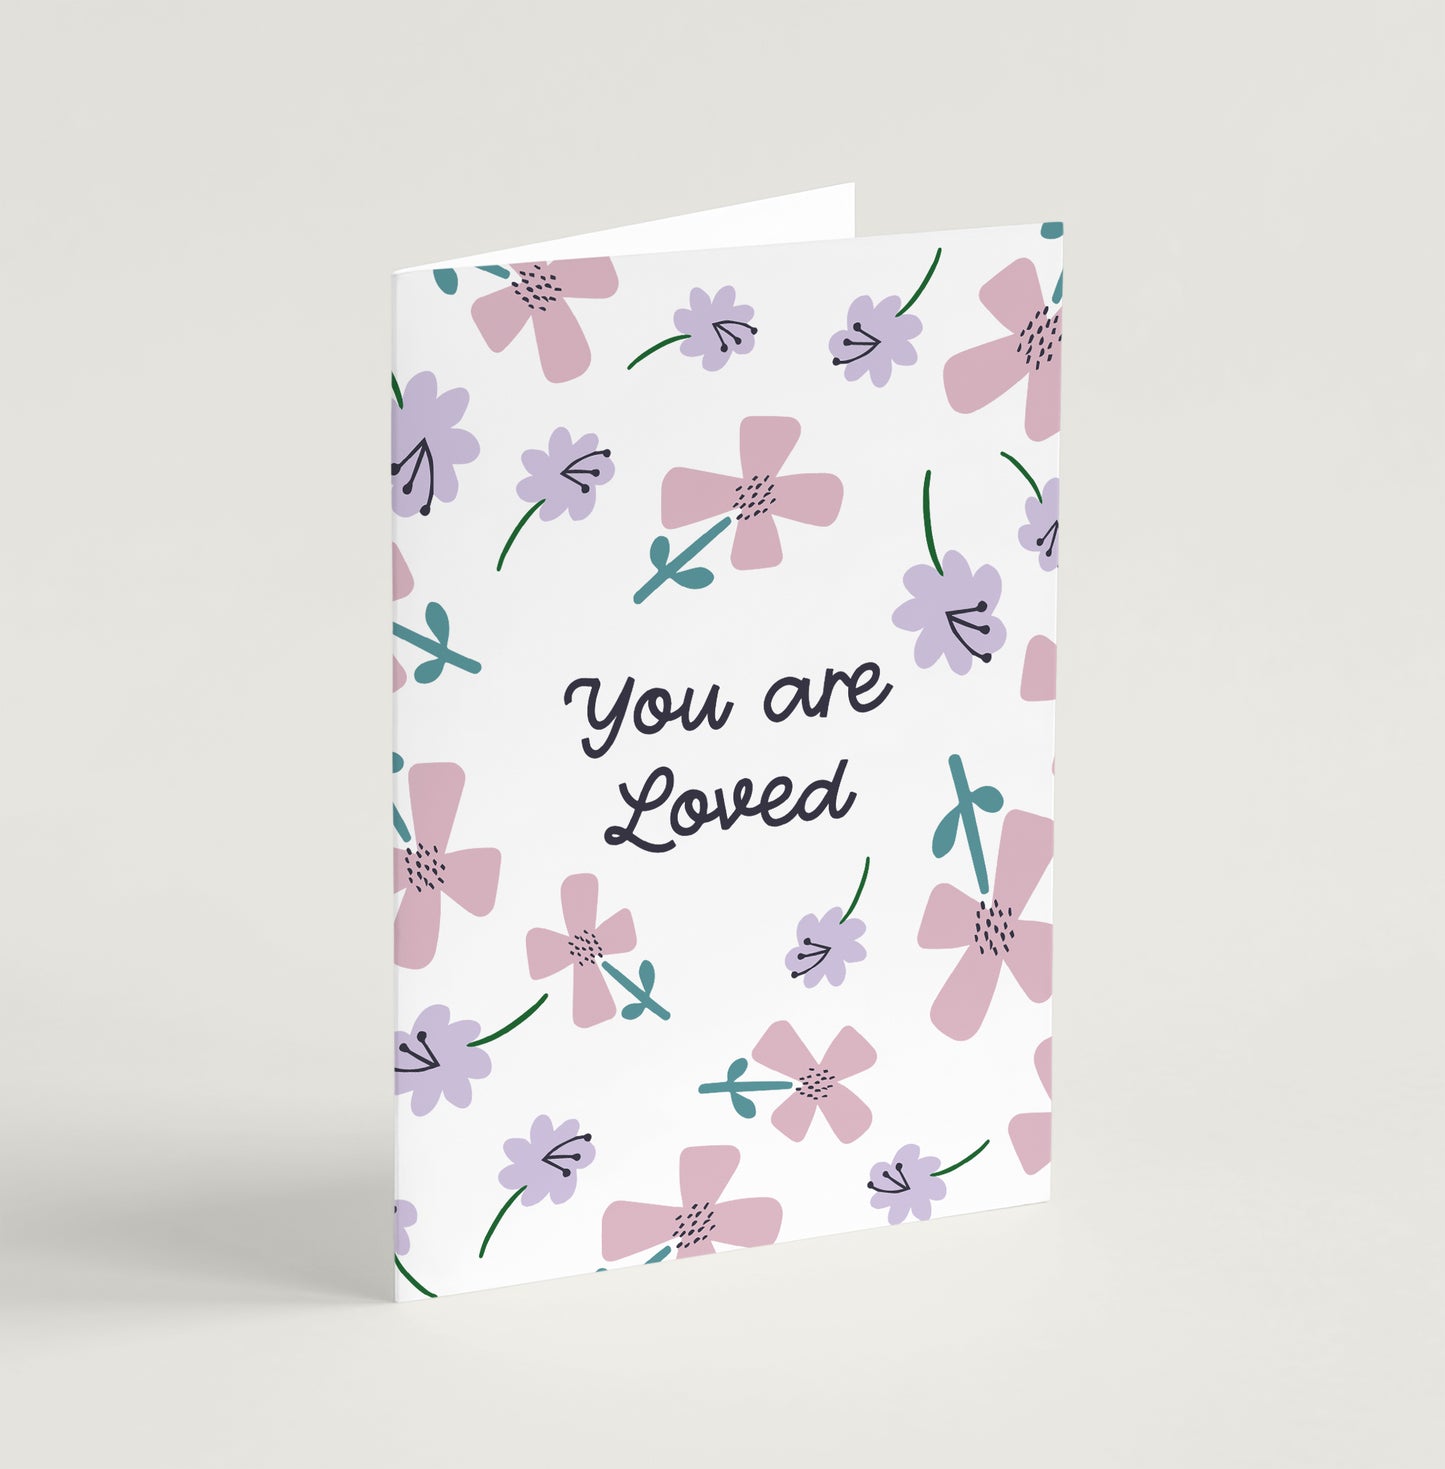 'You are loved' (Petals) - Greeting Card